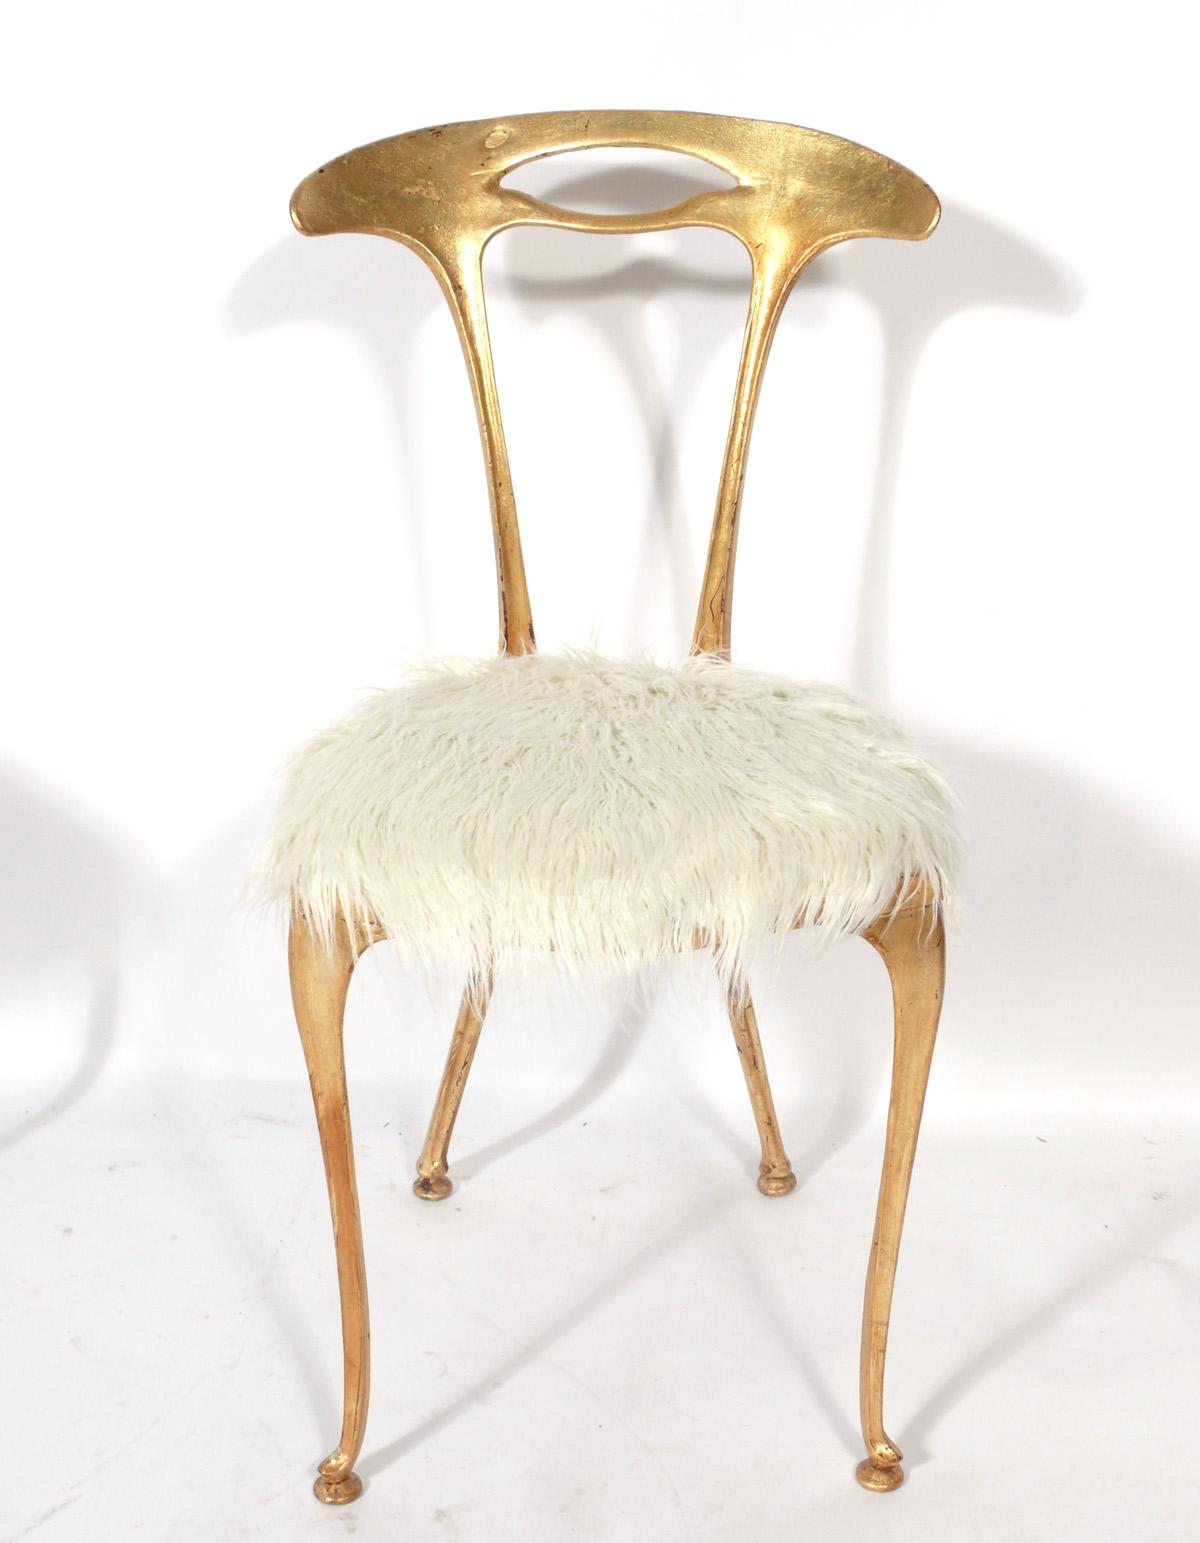 Pair of surrealist gilt metal and faux lamb upholstered chairs, designed for Palladio, Italy, circa 1950s. The price noted in this listing is for the pair of chairs.